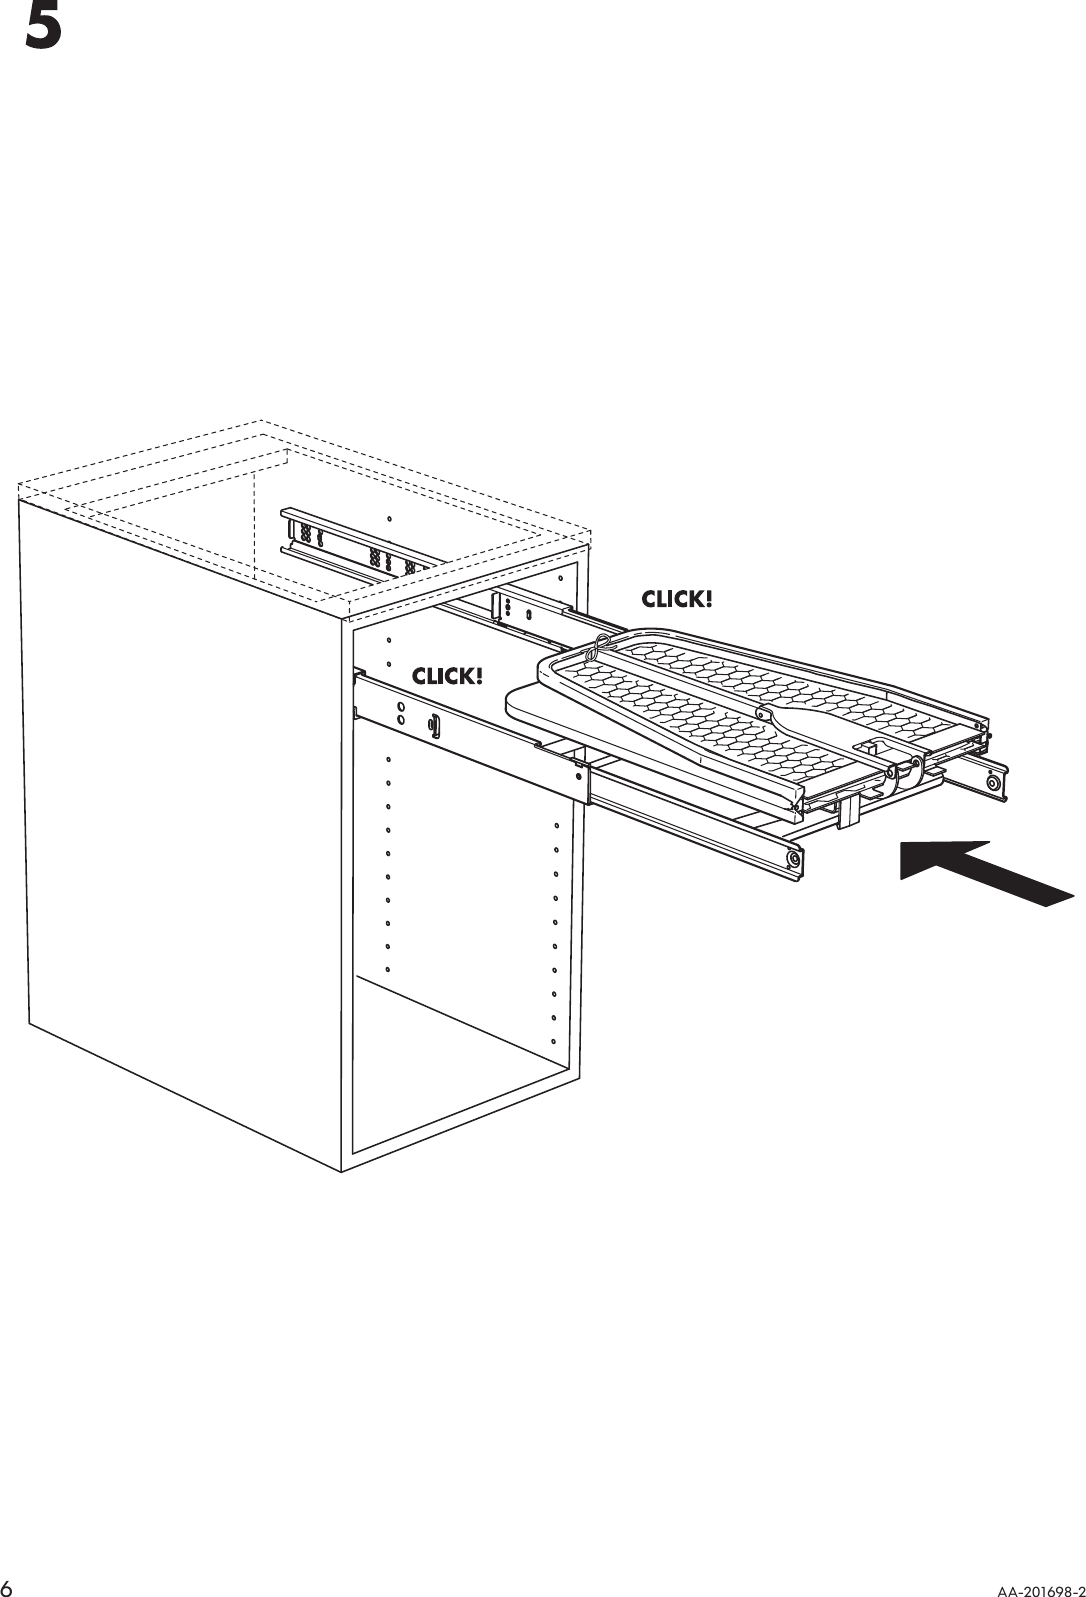 Page 6 of 8 - Ikea Ikea-Rationell-Pull-Out-Ironing-Board-Assembly-Instruction